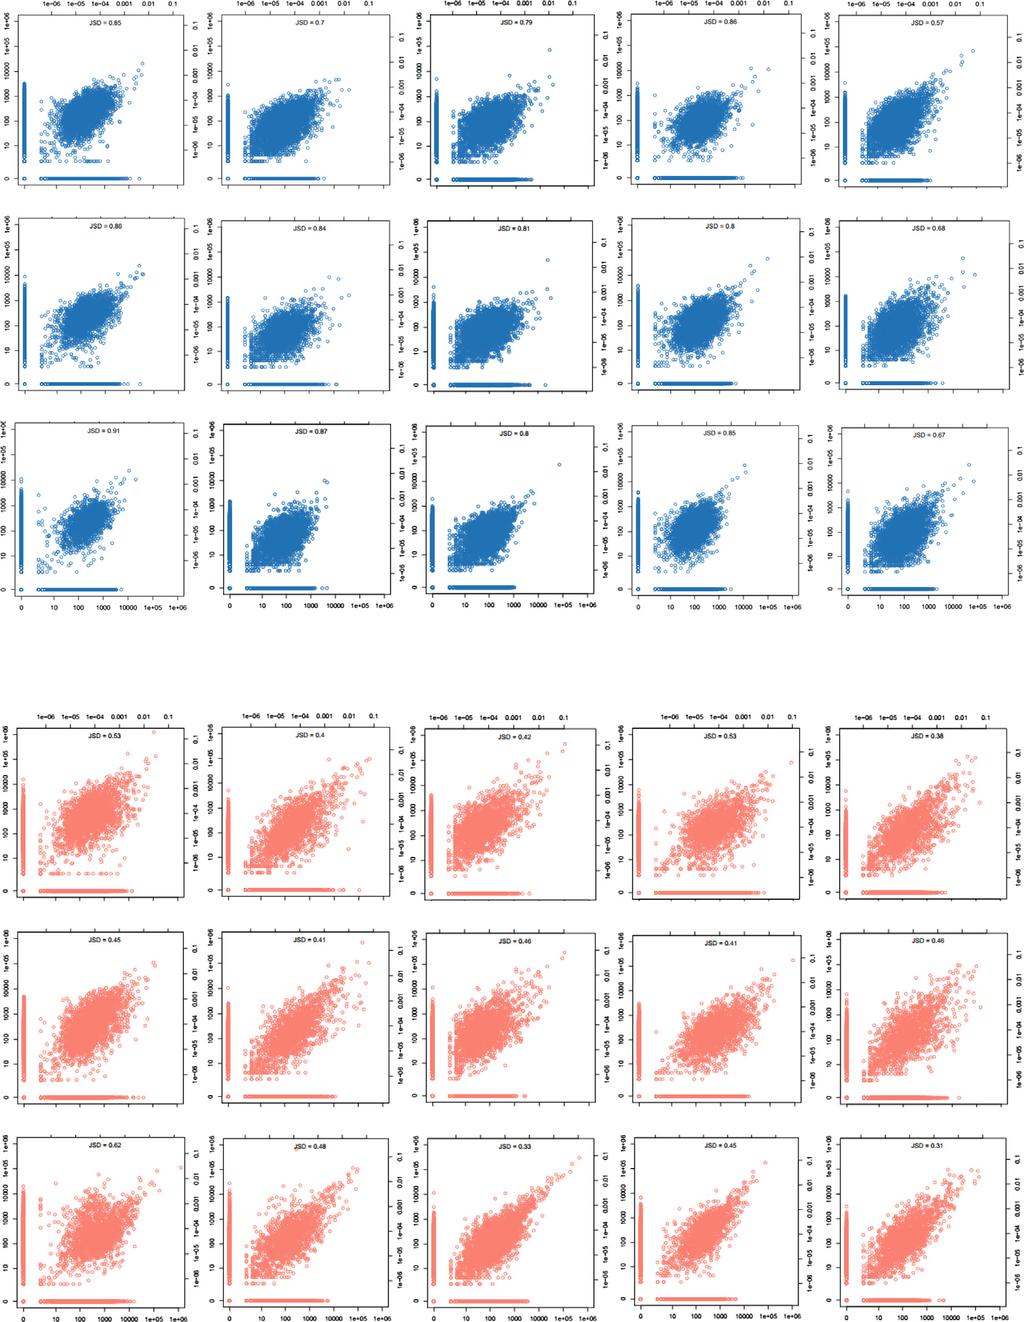 Figure S5. Total TCR Clonotype Occurrence from Individual Donors, Related to Figure 7 Comparison of CD4 (top-blue) and CD8 (bottom-red) TEM clonotype occurrence in each donor analyzed.